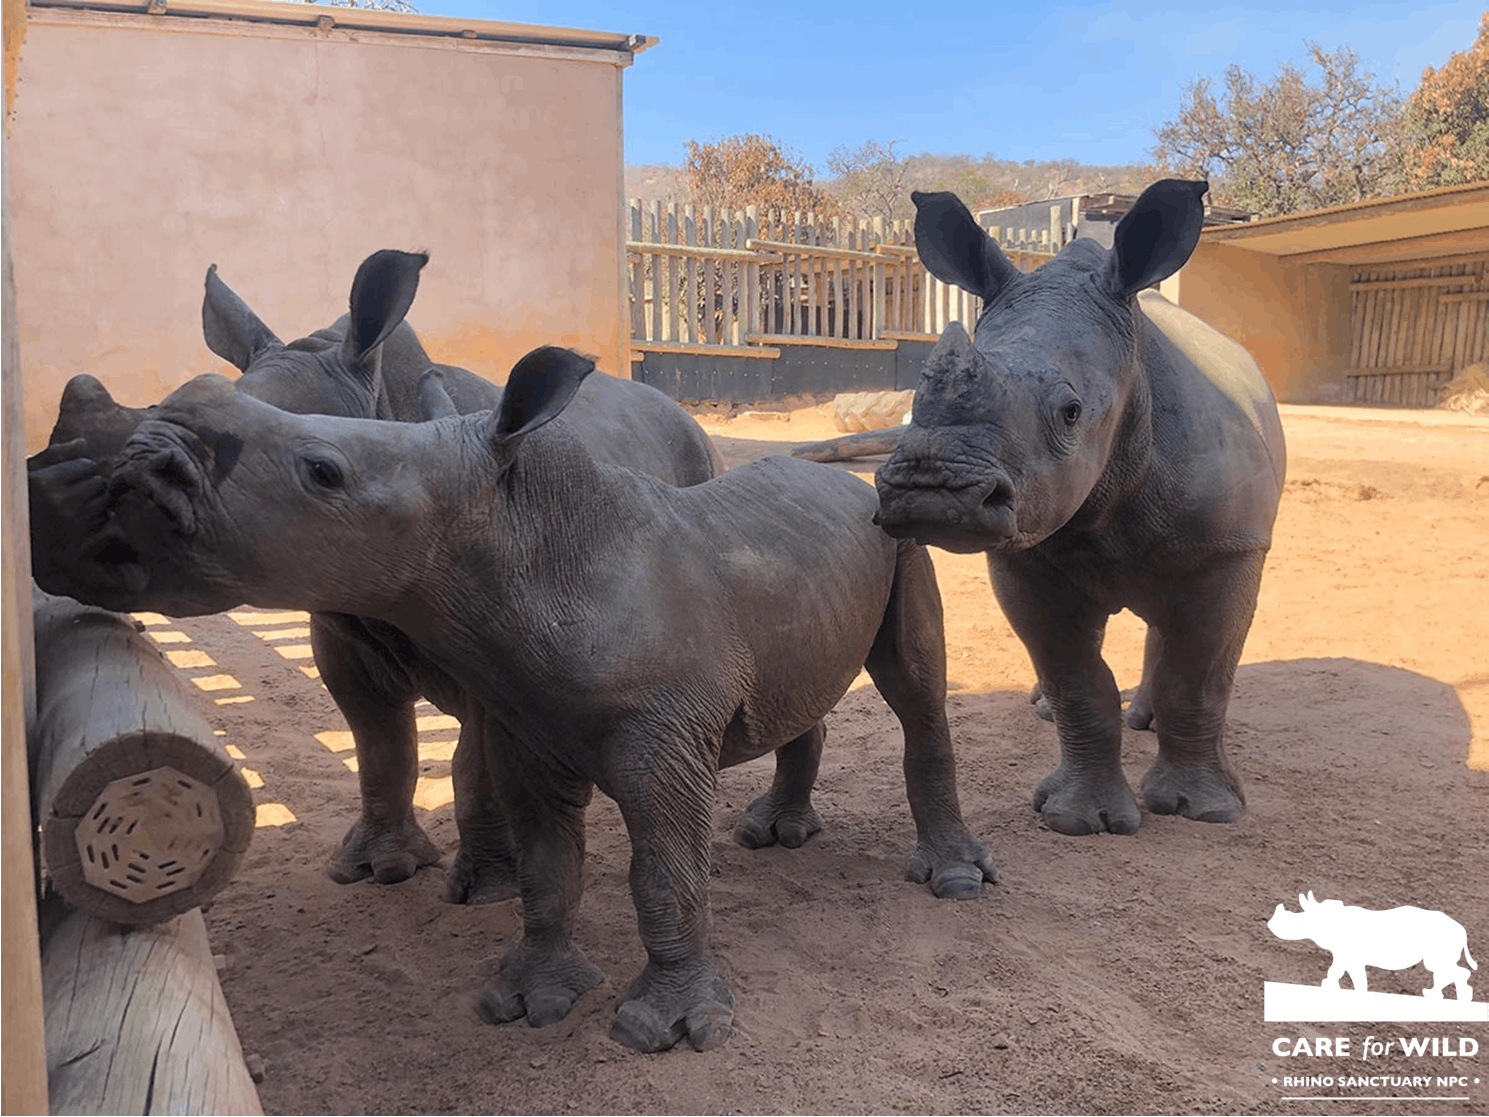 Care for Wild Gives Orphaned Rhinos a Second Chance